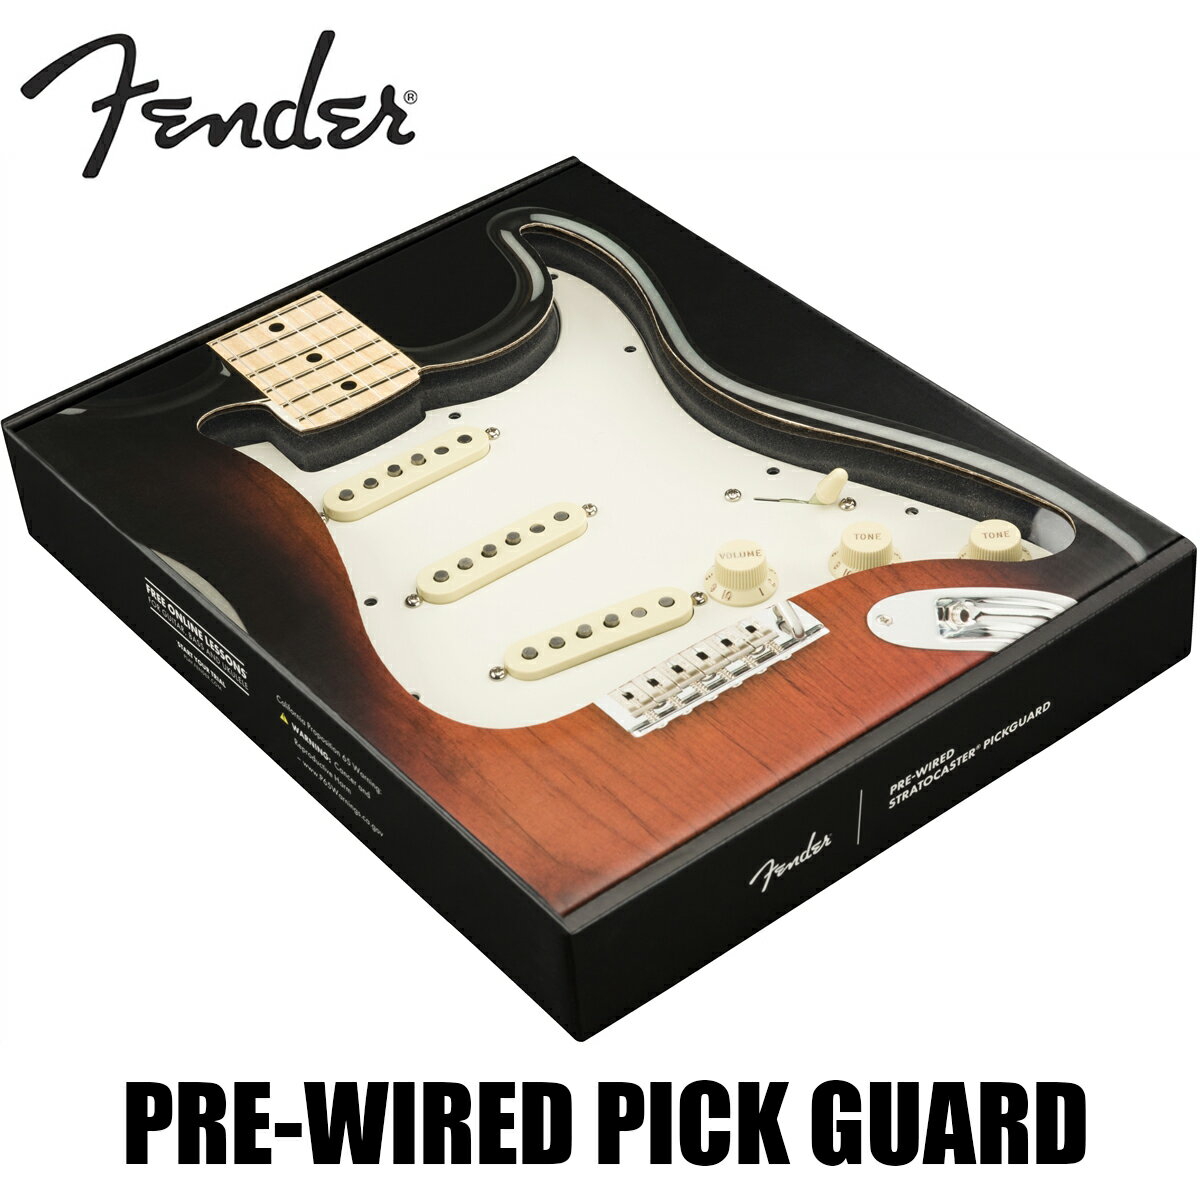 Fender Pre-Wired Strat Pickguard Texas Special SSS -Parchment / 11 Hole PG- 新品[フェンダー][ピックガード][ギターパーツ,リプレイスメントパーツ]